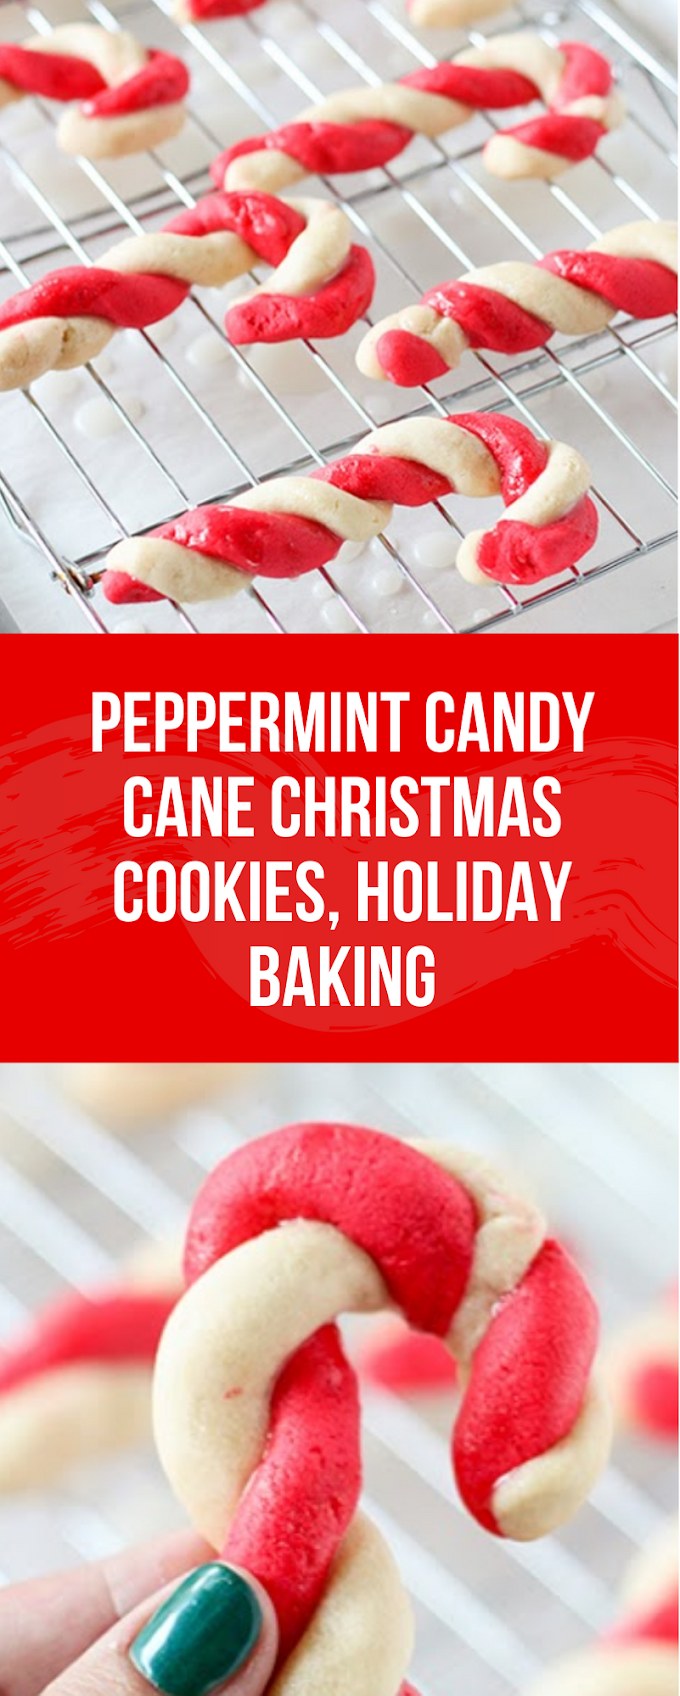 Peppermint Candy Cane Christmas Cookies, Holiday Baking